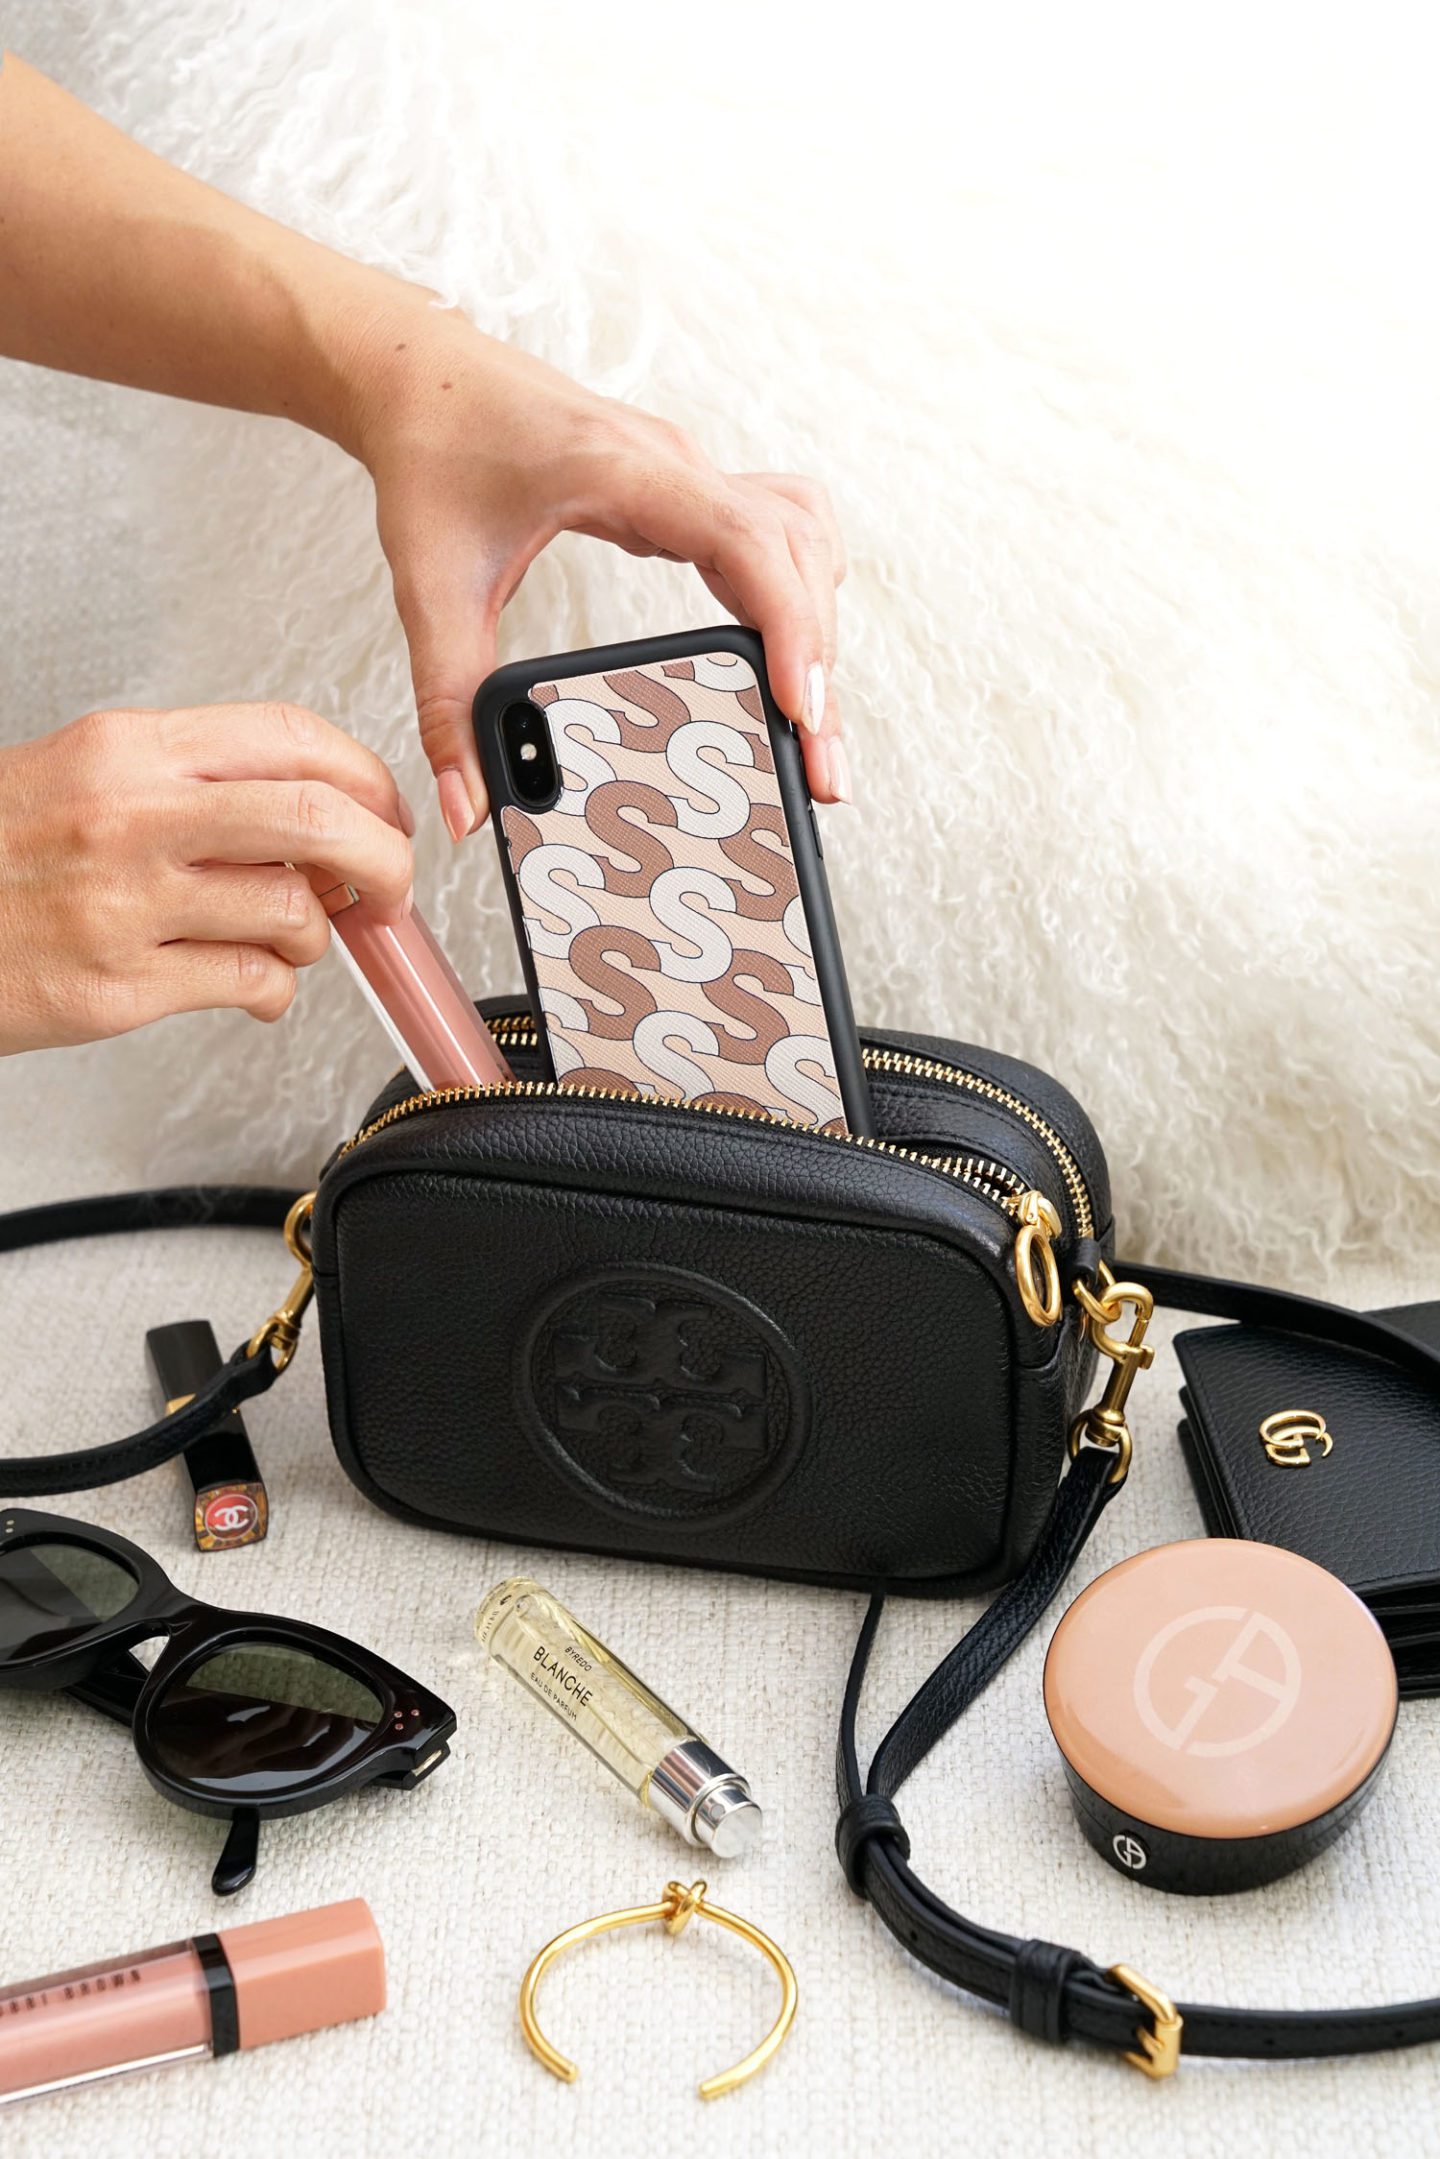 Tory Burch Perry Bombe Mini Bag Review | The Beauty Look Book